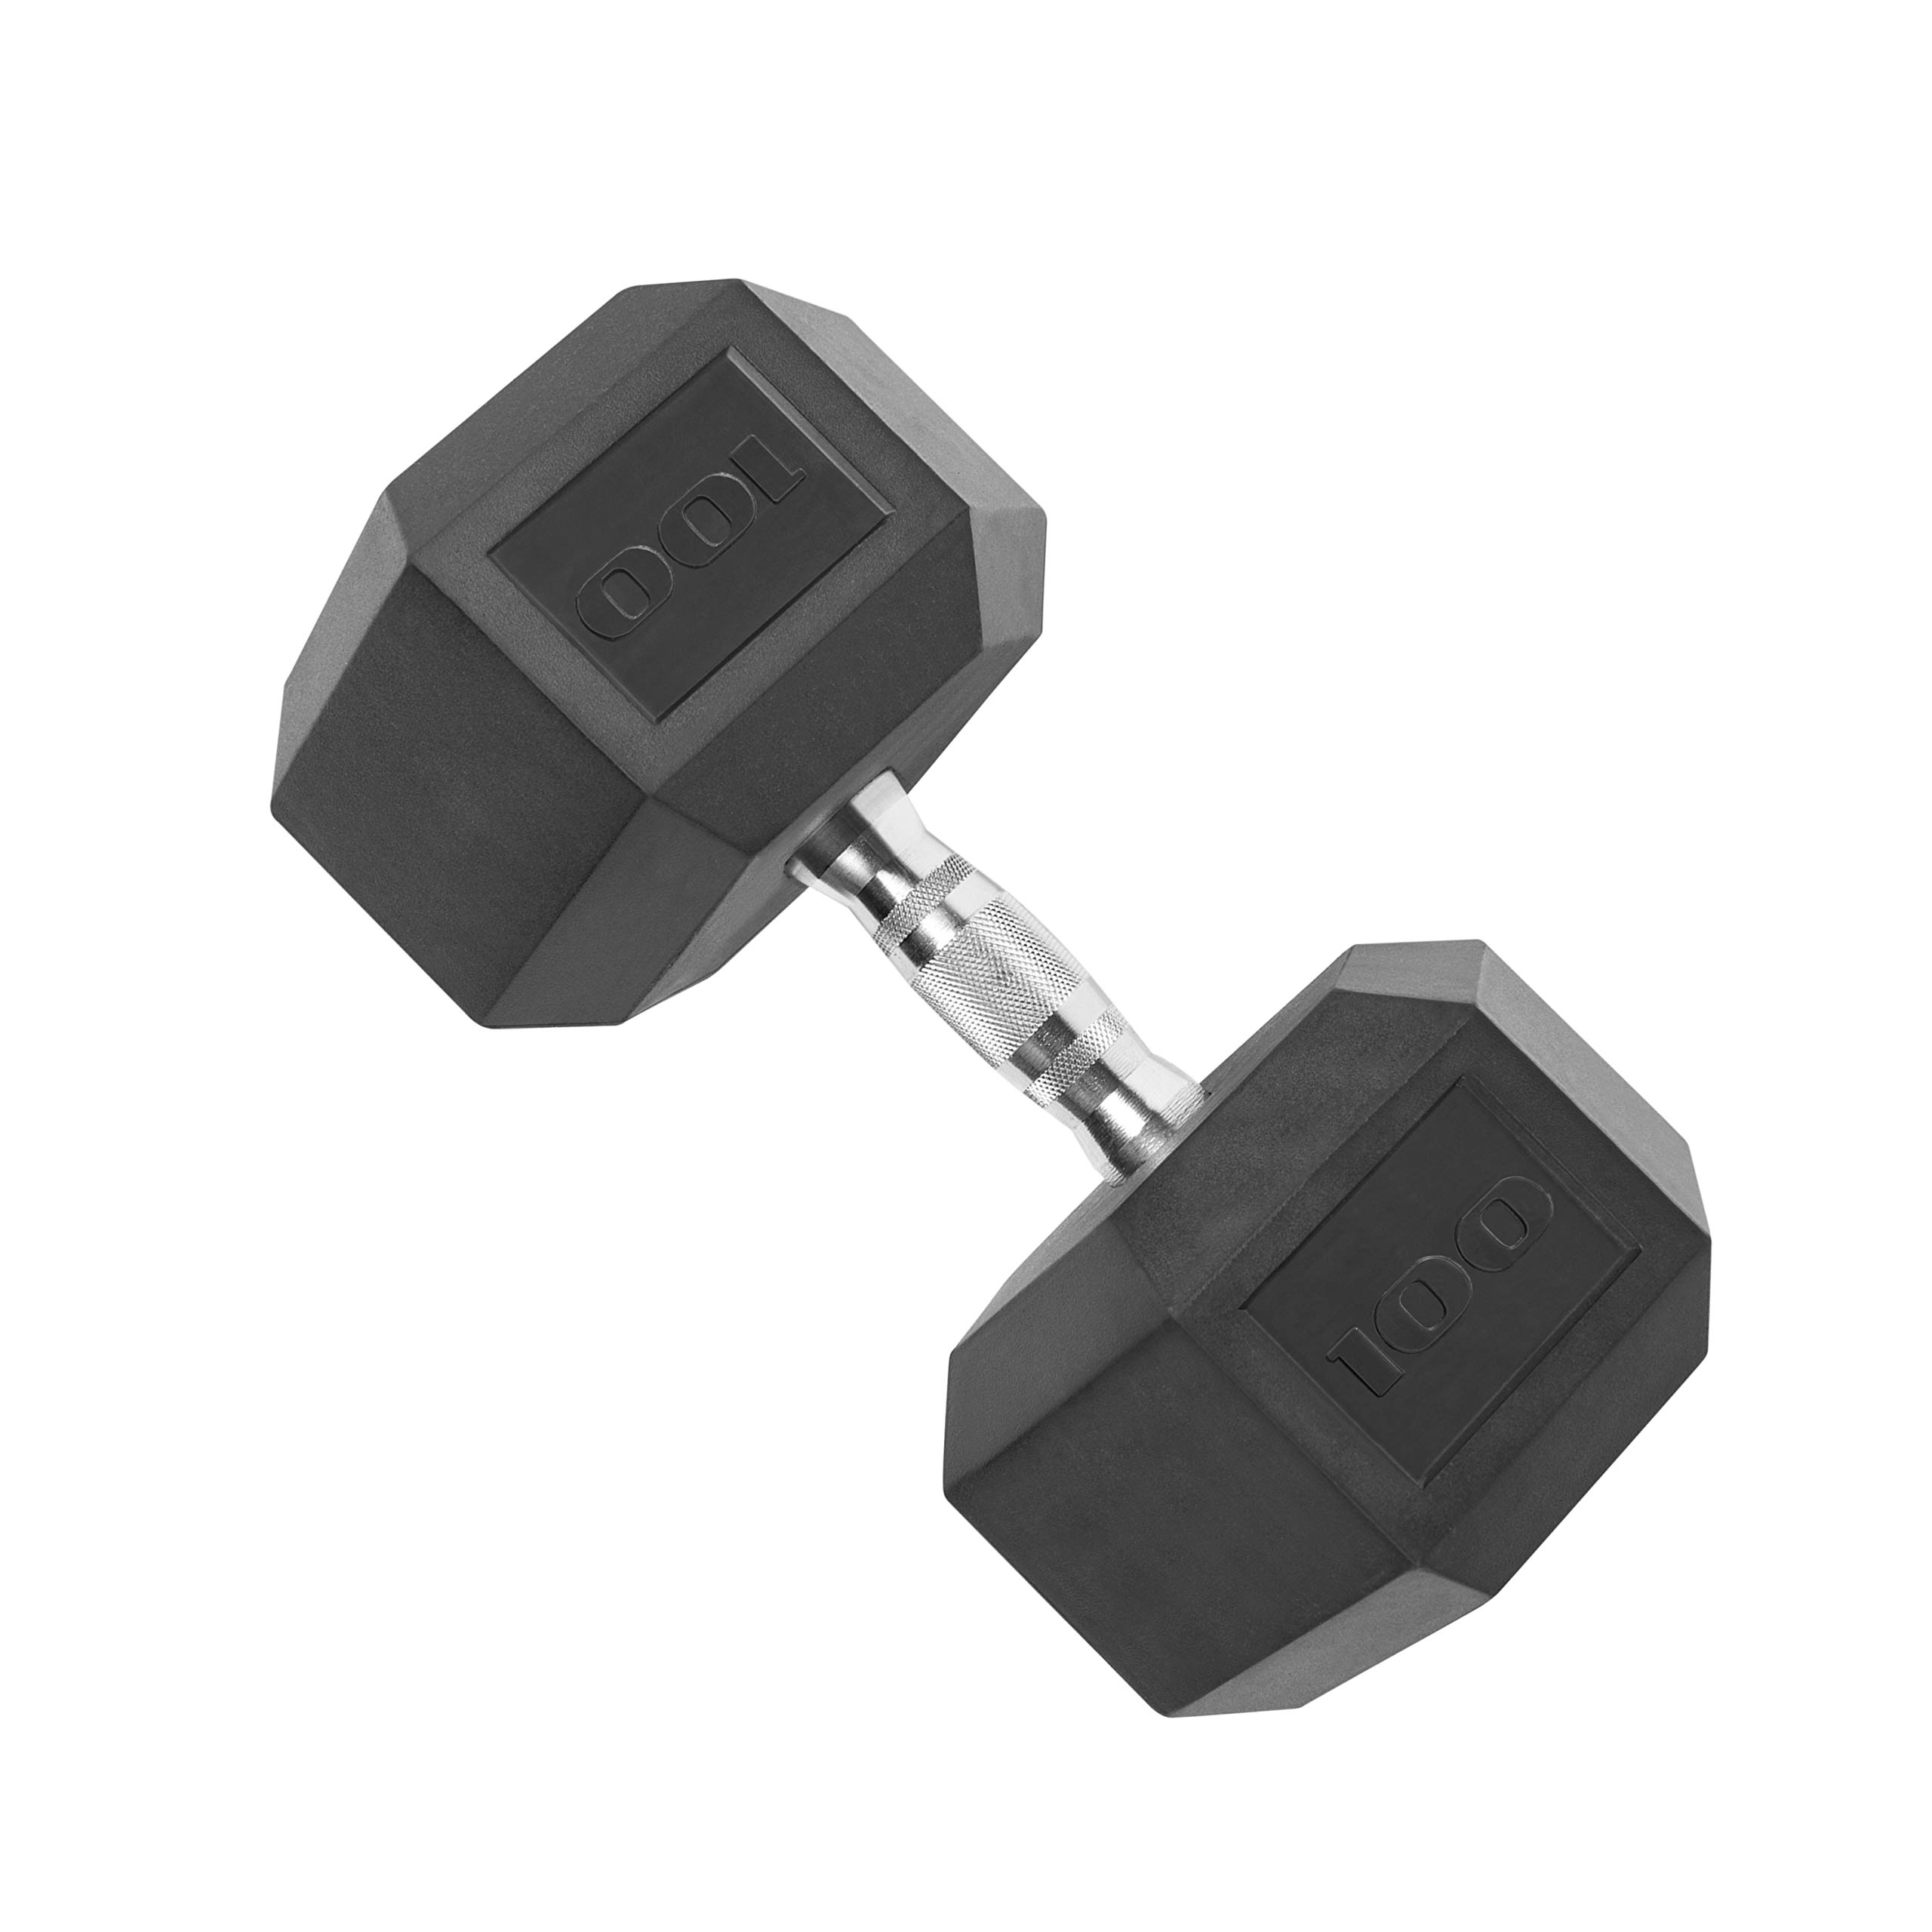 Cap Barbell cap 100 LB coated Hex Dumbbell Weight, New Edition, Black, (SDRIS-100)